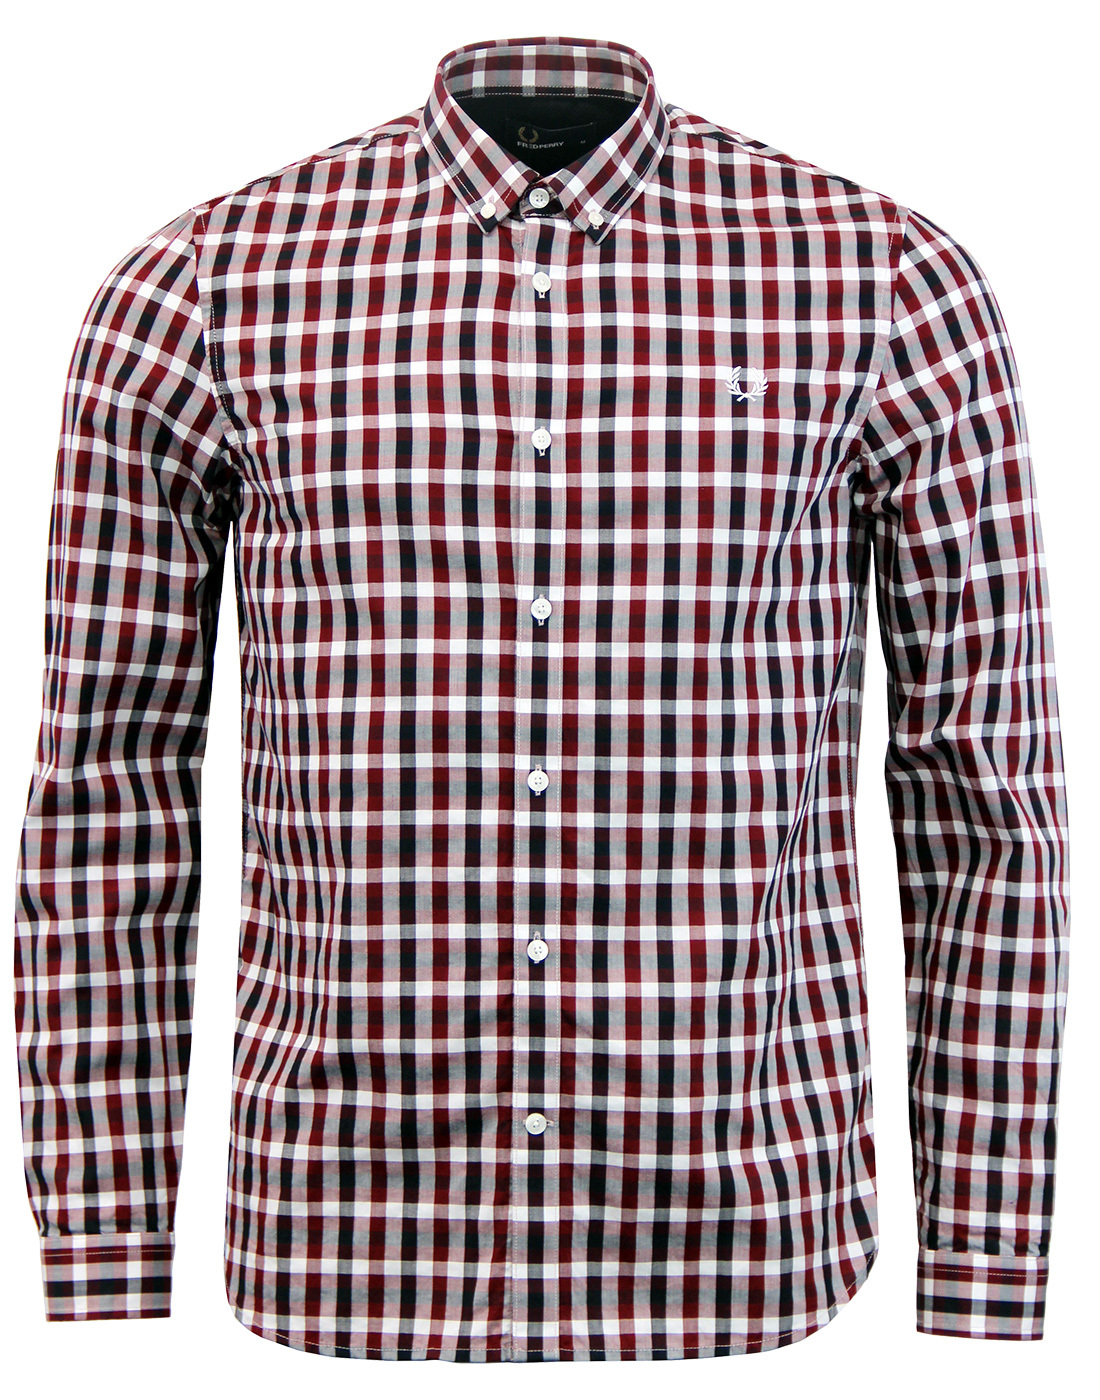 FRED PERRY Mod Gingham Check Button Down Shirt R